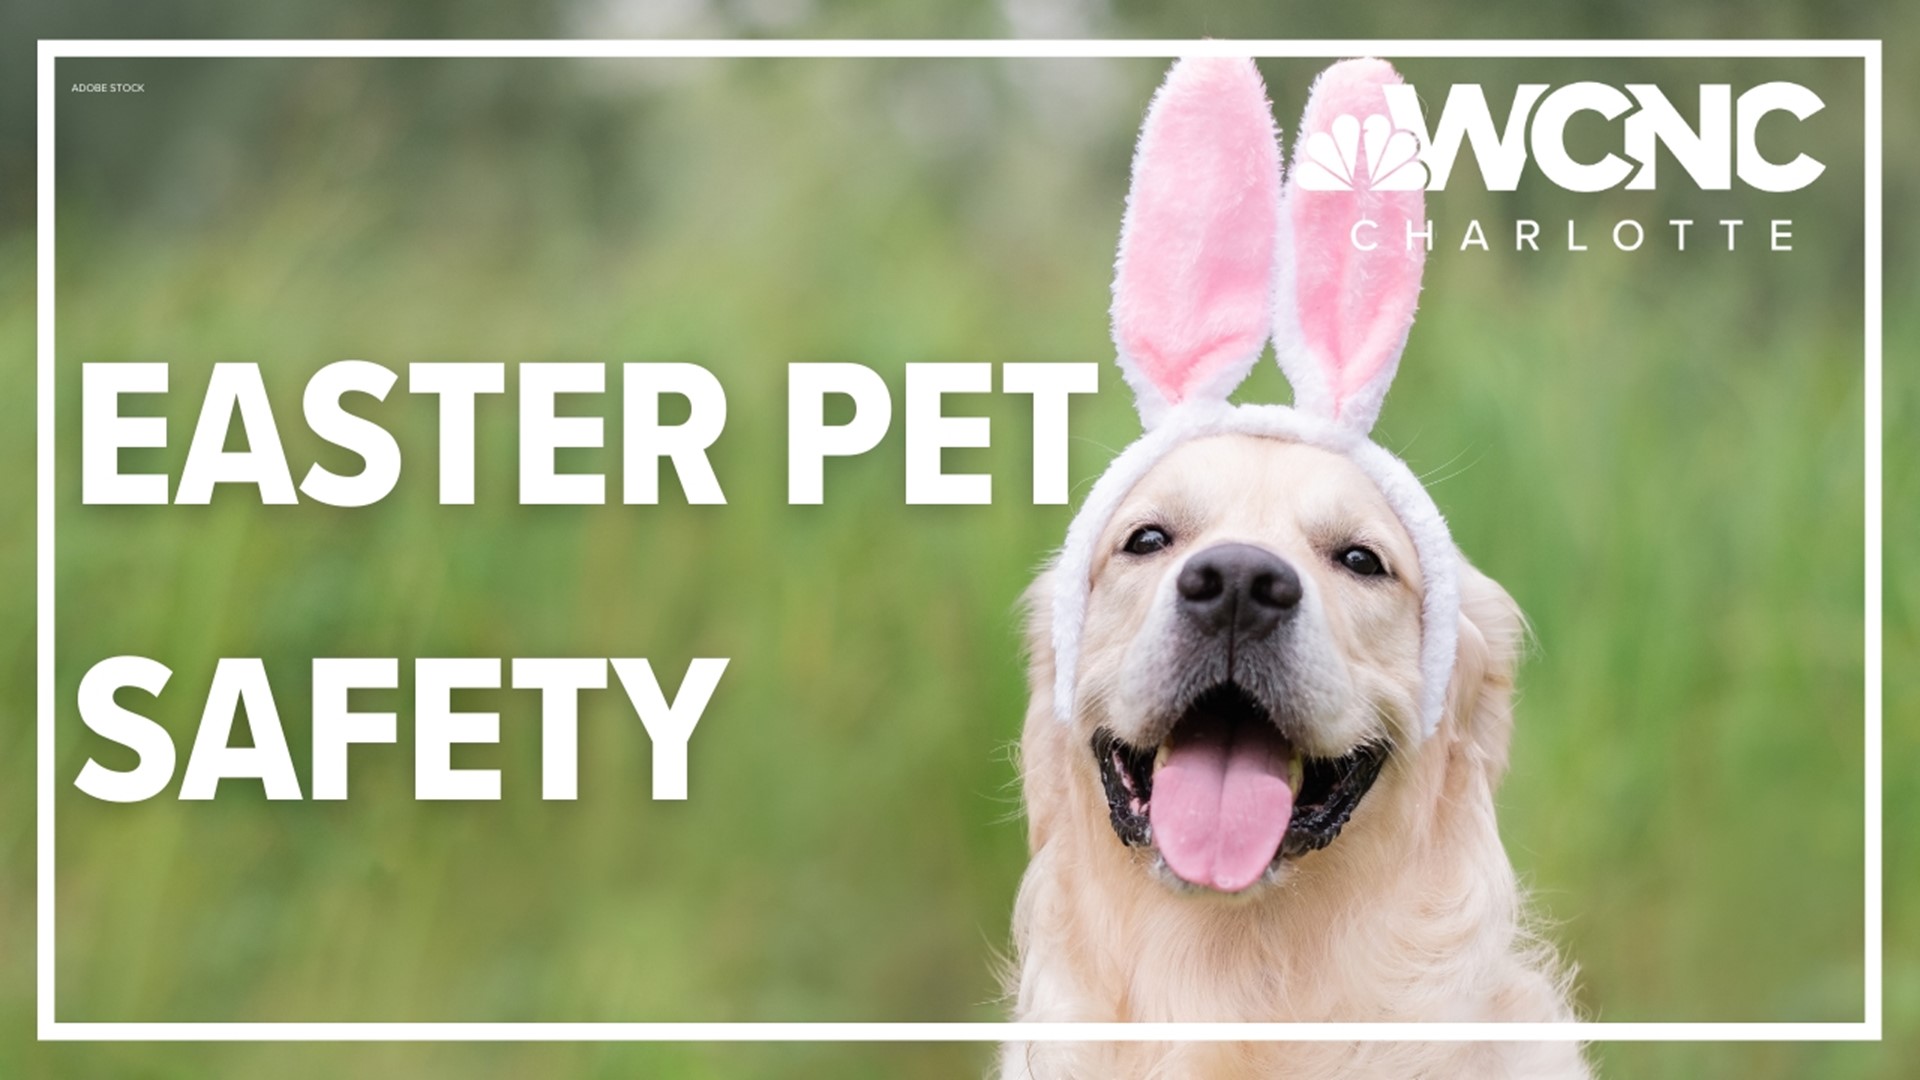 Chocolate is one of the most popular Easter candies, and while it can be enjoyable for us, it can be dangerous for your pets.